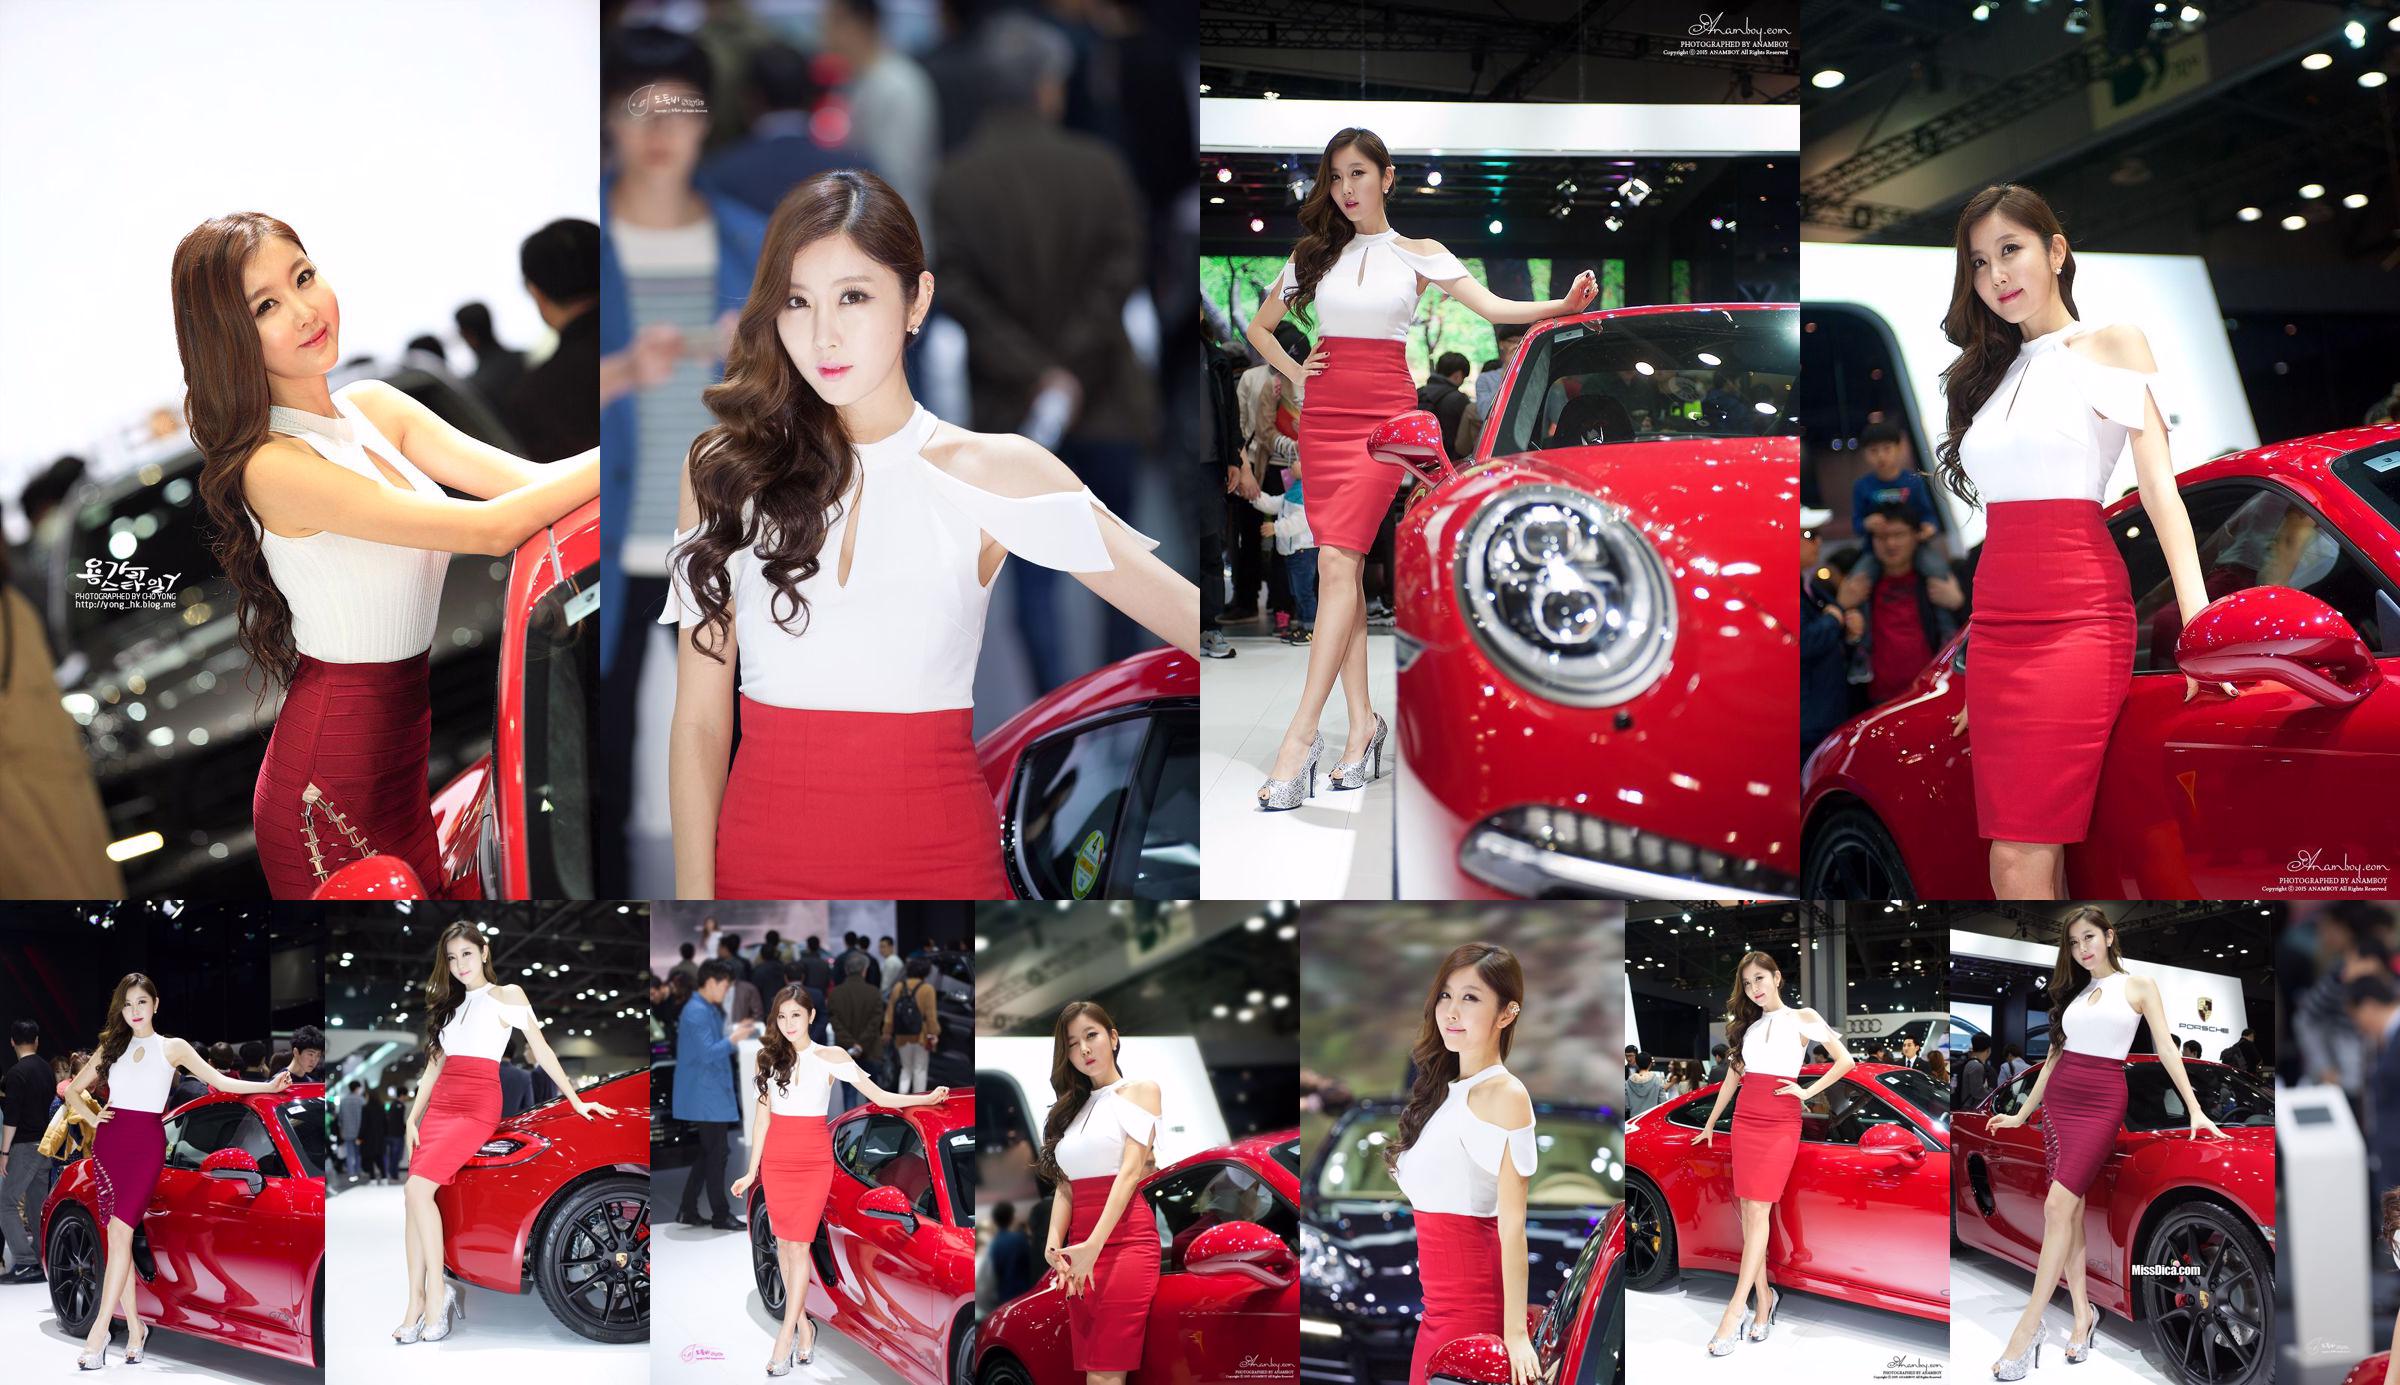 Photo Collection of Korean Car Model Cui Xingya/Cui Xinger's "Red Skirt Series at Auto Show" No.1ee68a Page 1